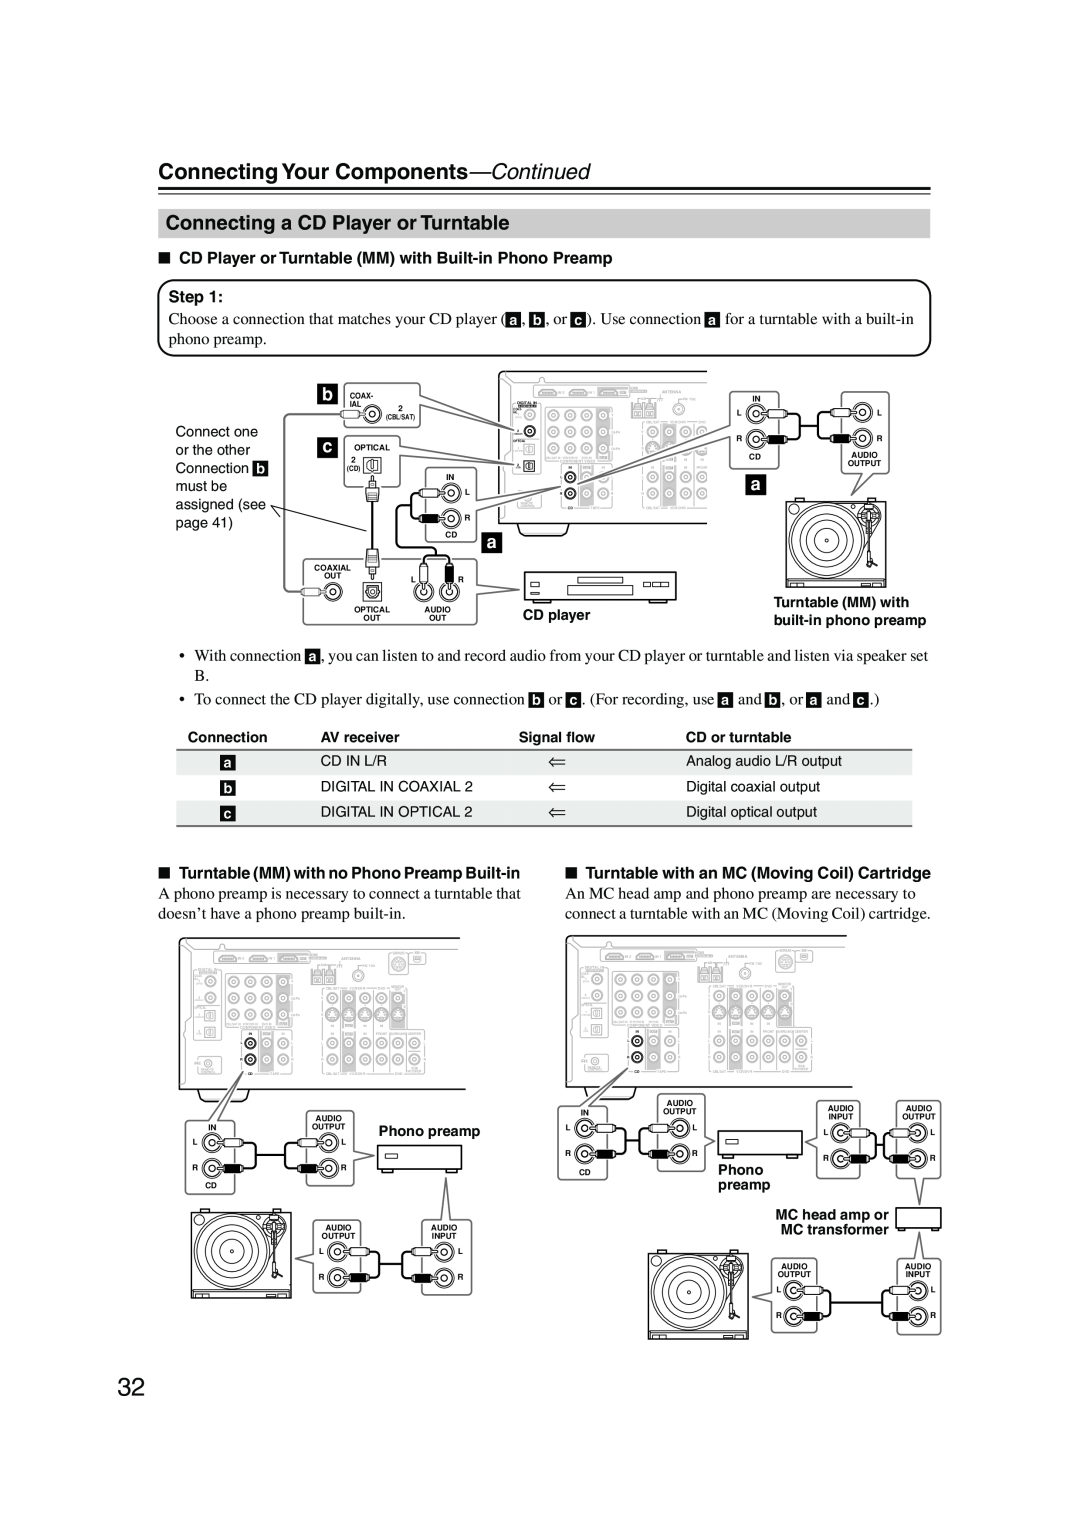 Onkyo HT-SP904 instruction manual Connecting a CD Player or Turntable, Connecting Your Components—Continued, Step 